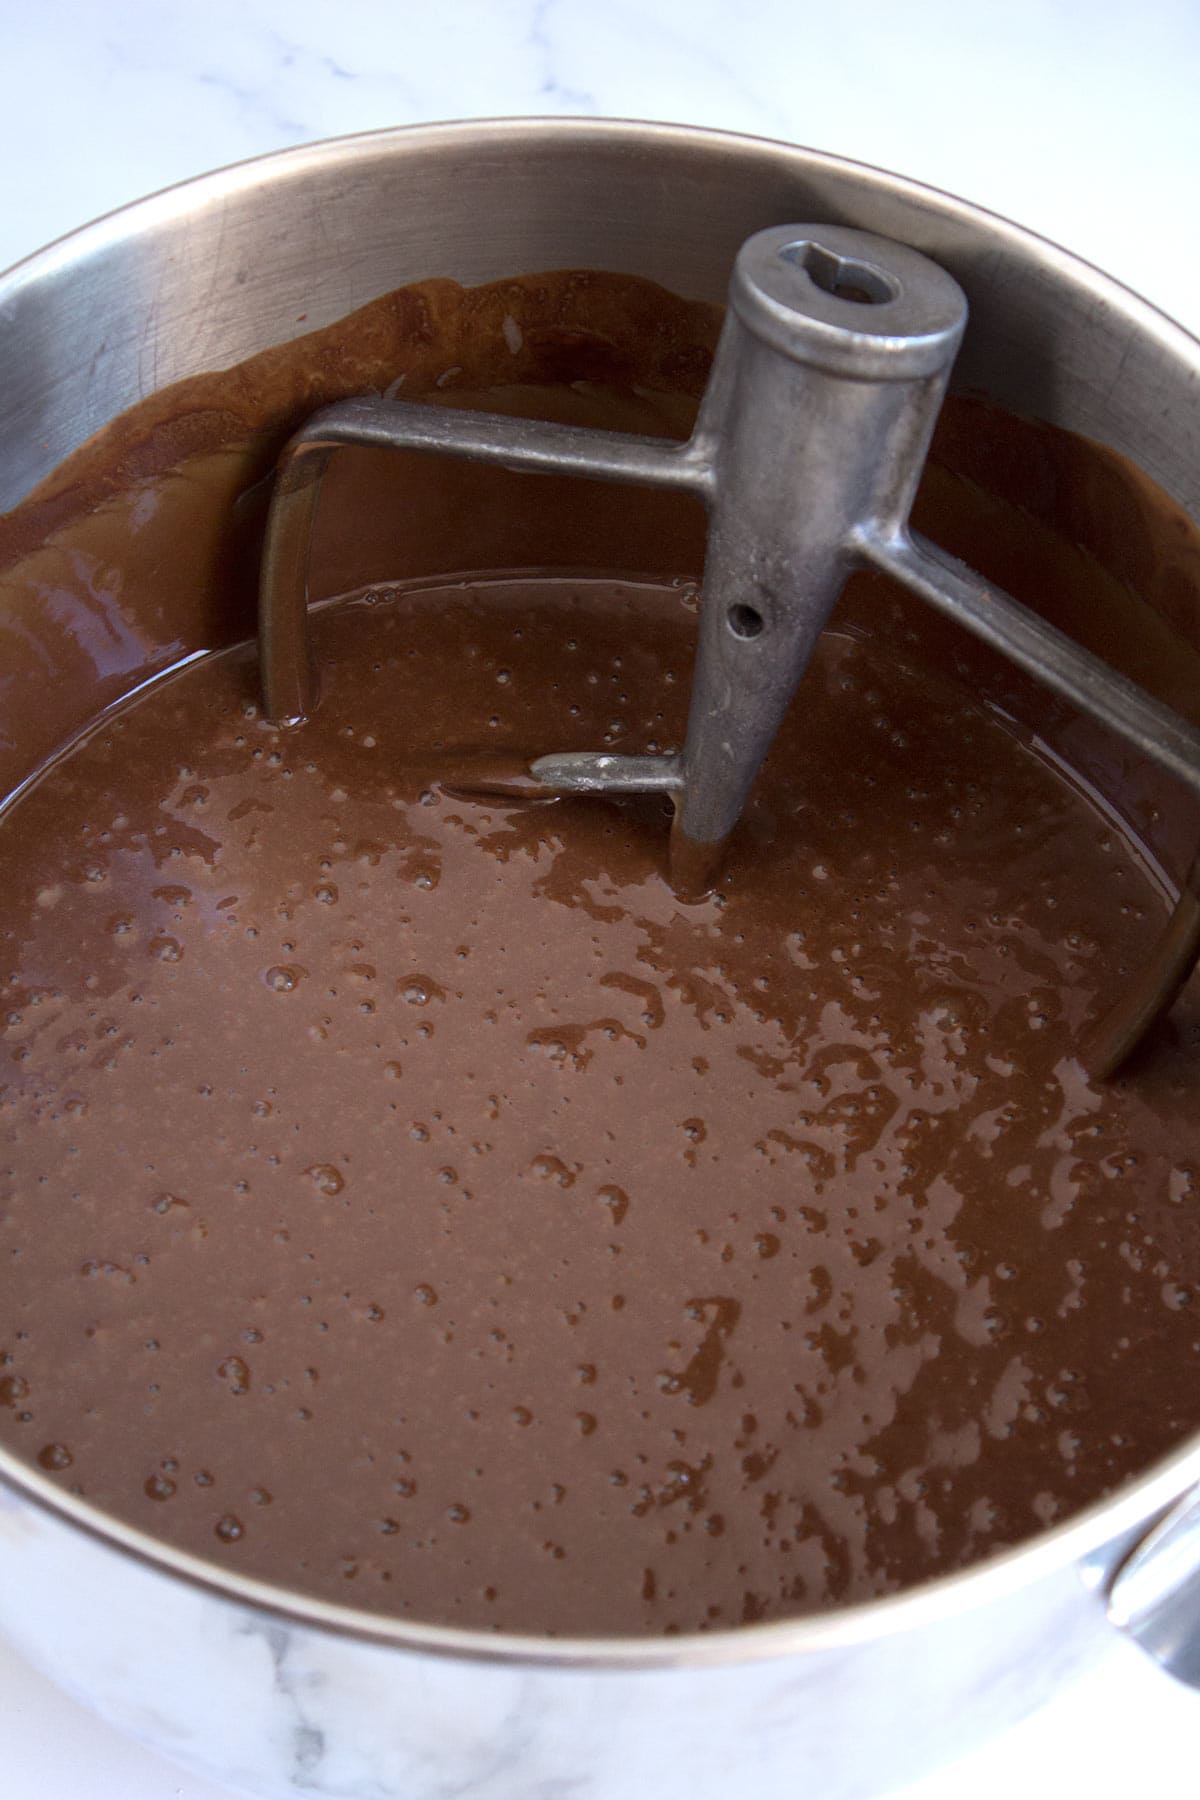 Chocolate and coffee mixture added into cake batter.